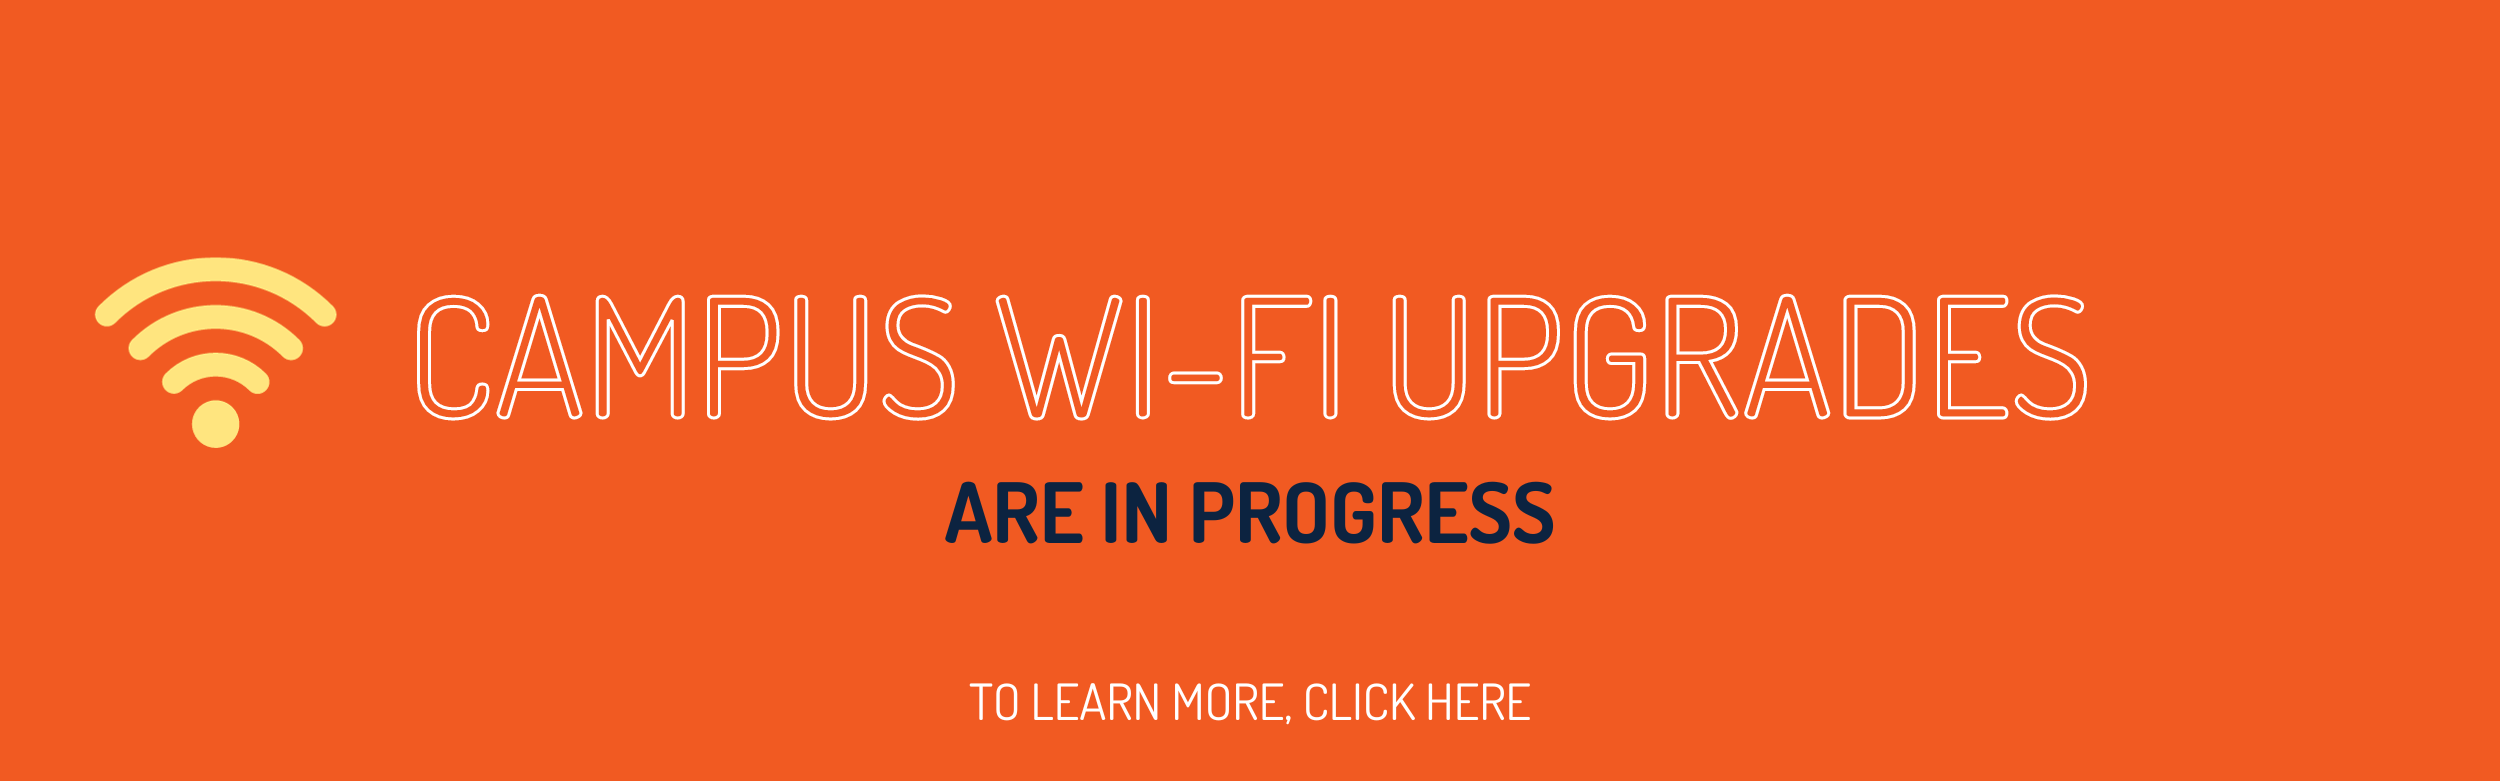 Campus-Wi-Fi-Upgrades-Banner.png